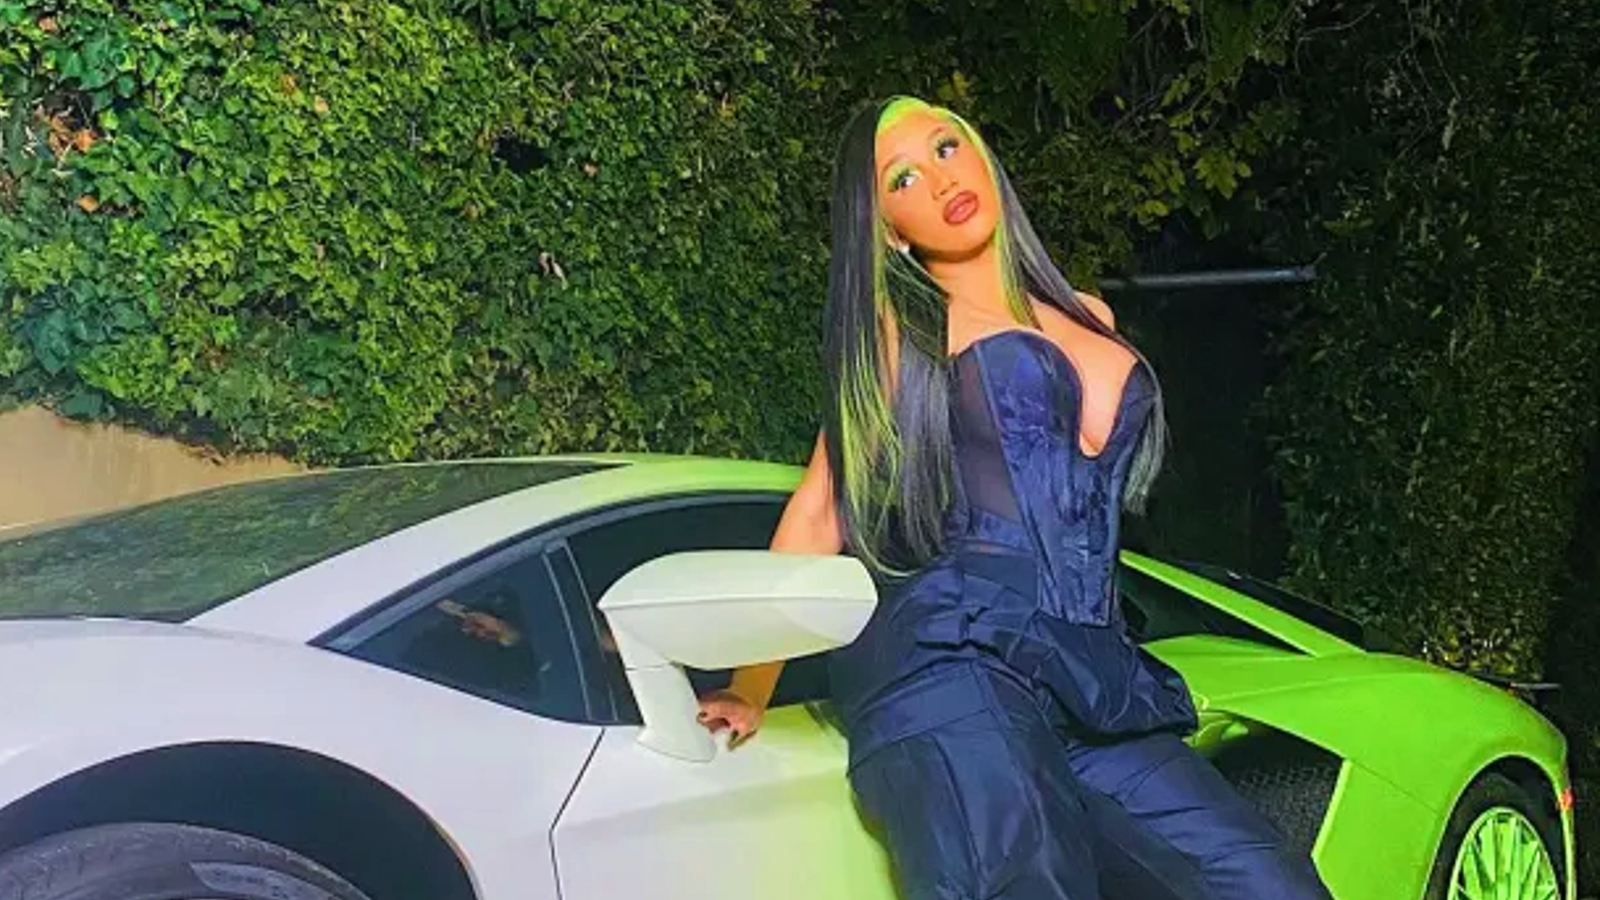 What Expensive Cars Does Cardi B Have and Why Can't She Drive?